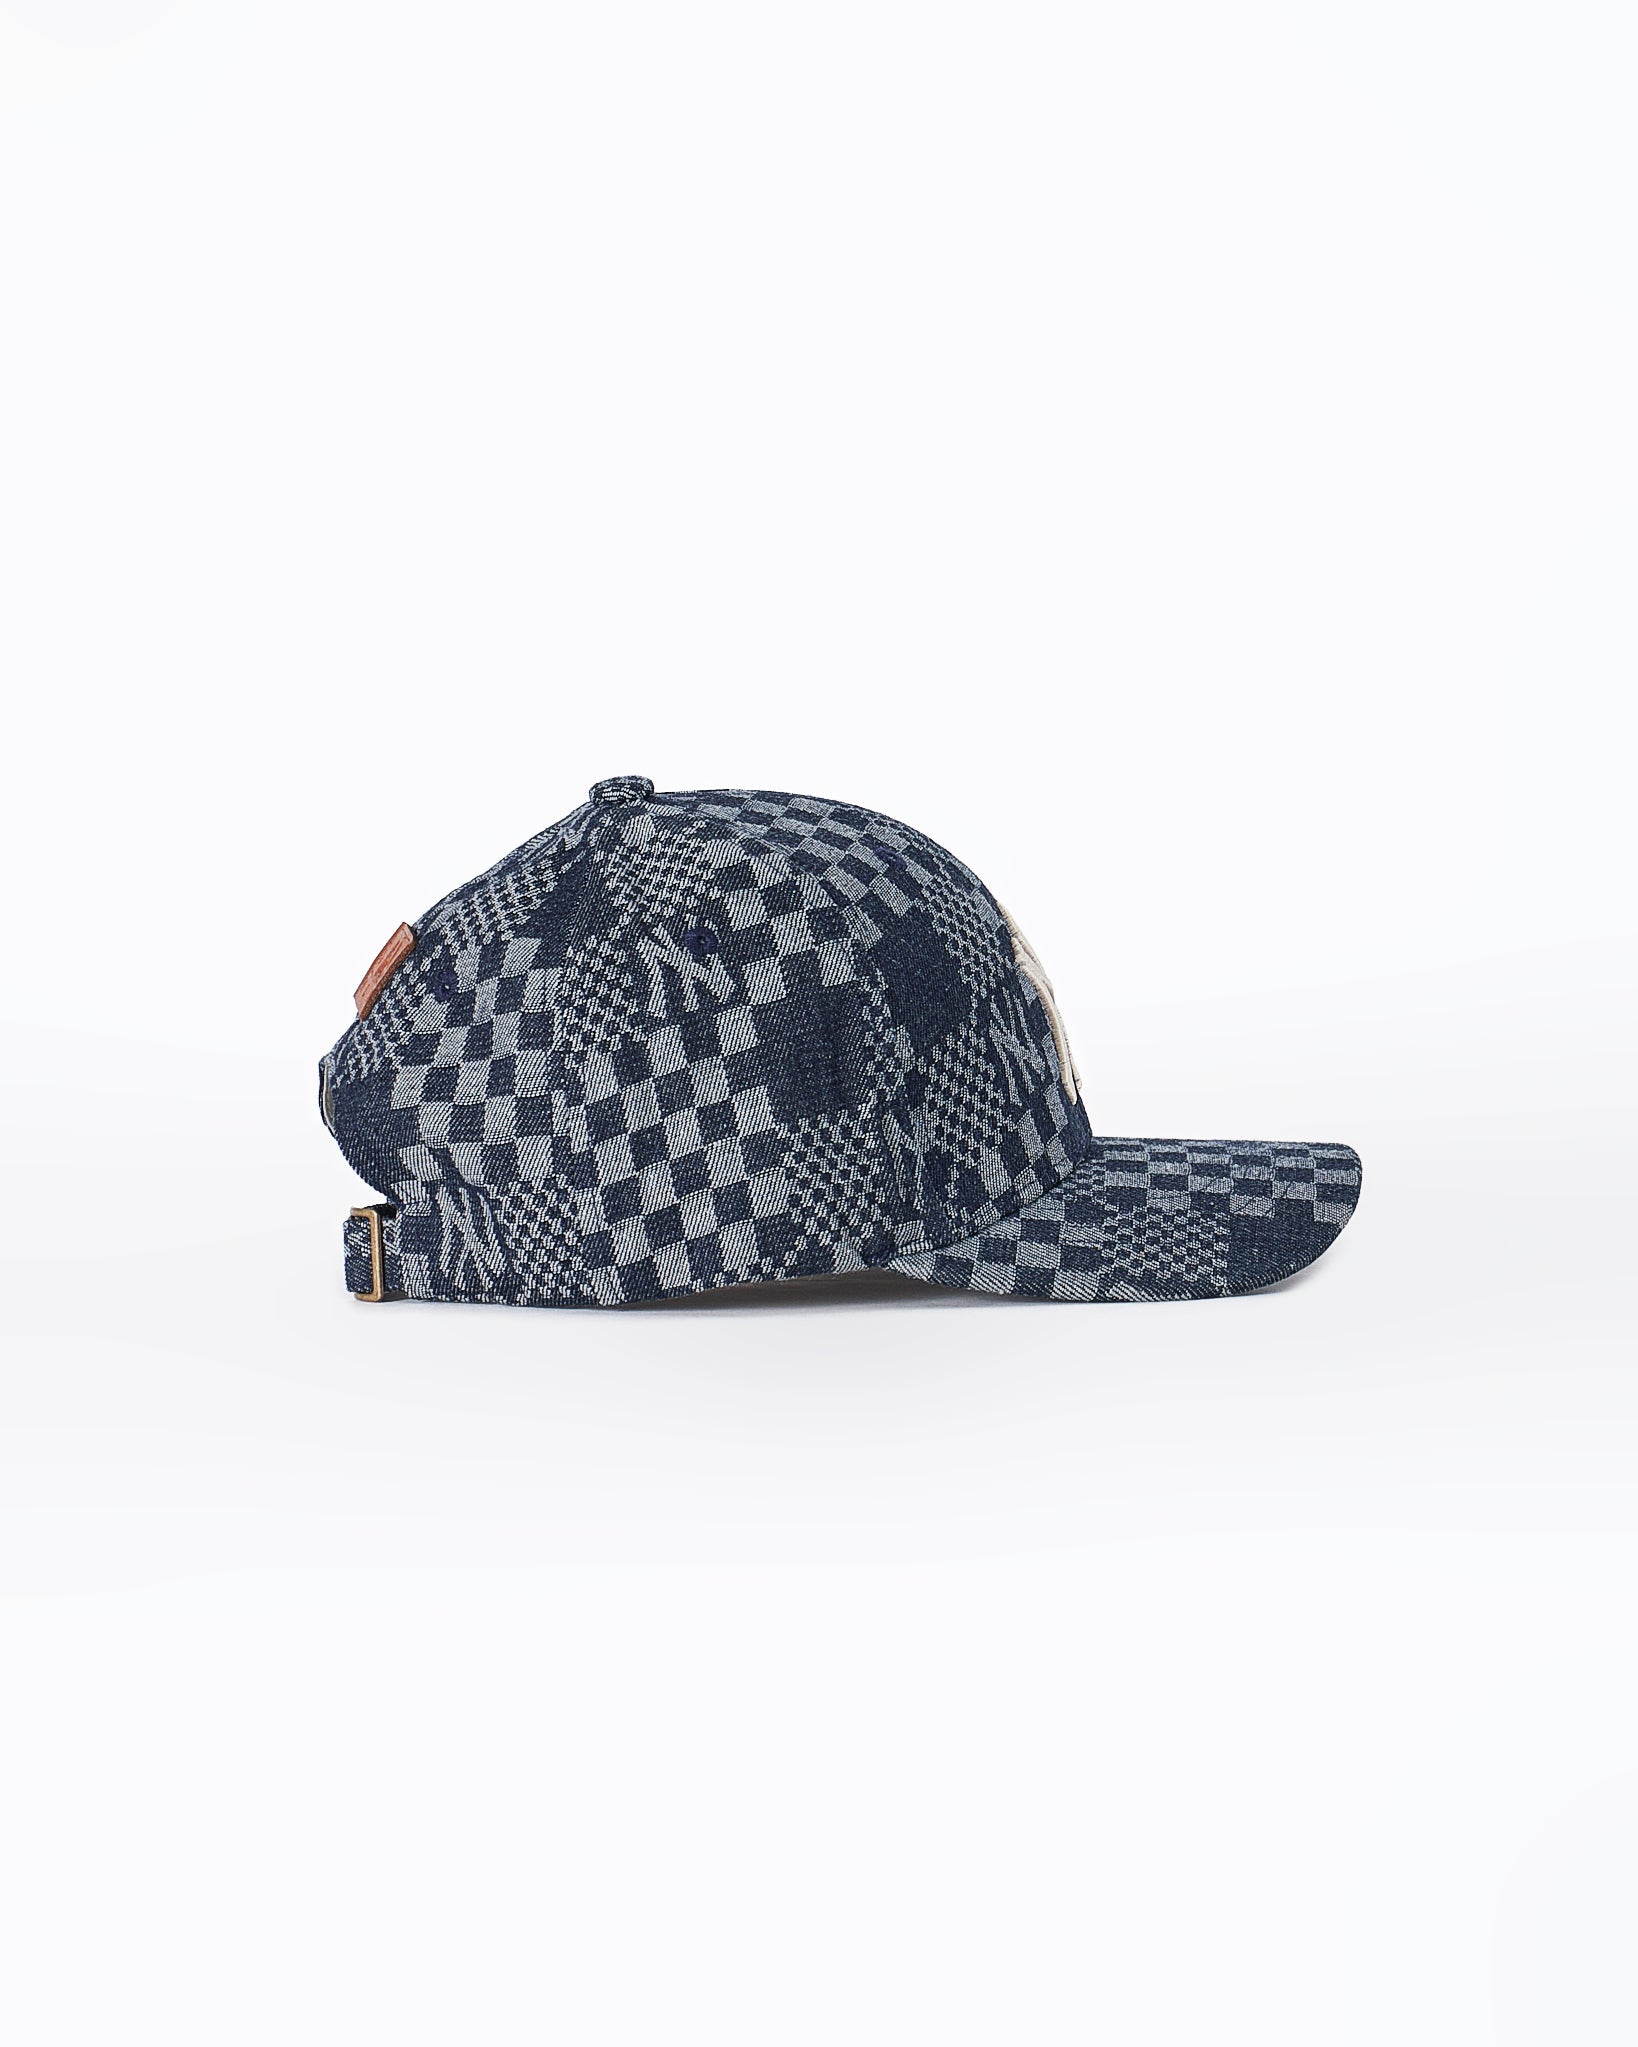 MOI OUTFIT-NY Logo Embroidered Cap 12.50